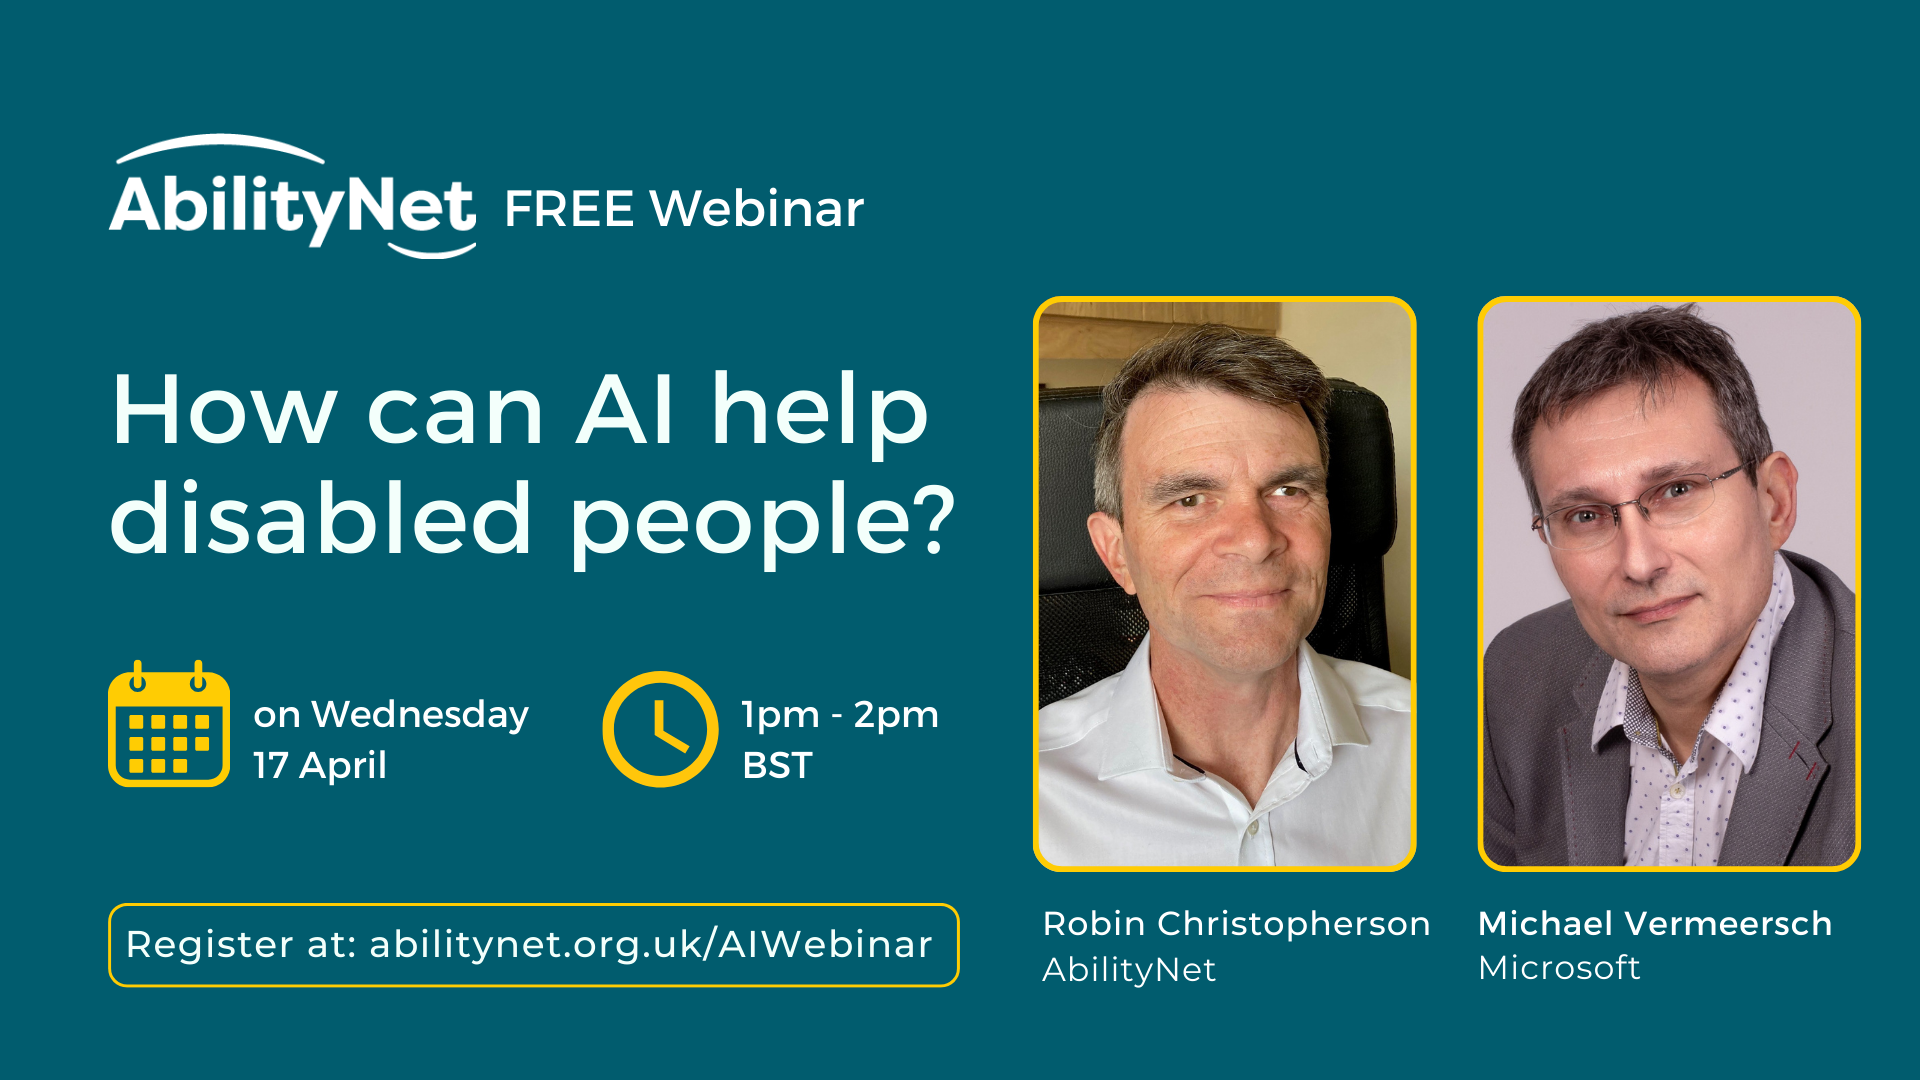 Graphic showing images of Robin Christopherson and Michael Vermeersch of Microsoft and webinar title How can AI help disabled people?